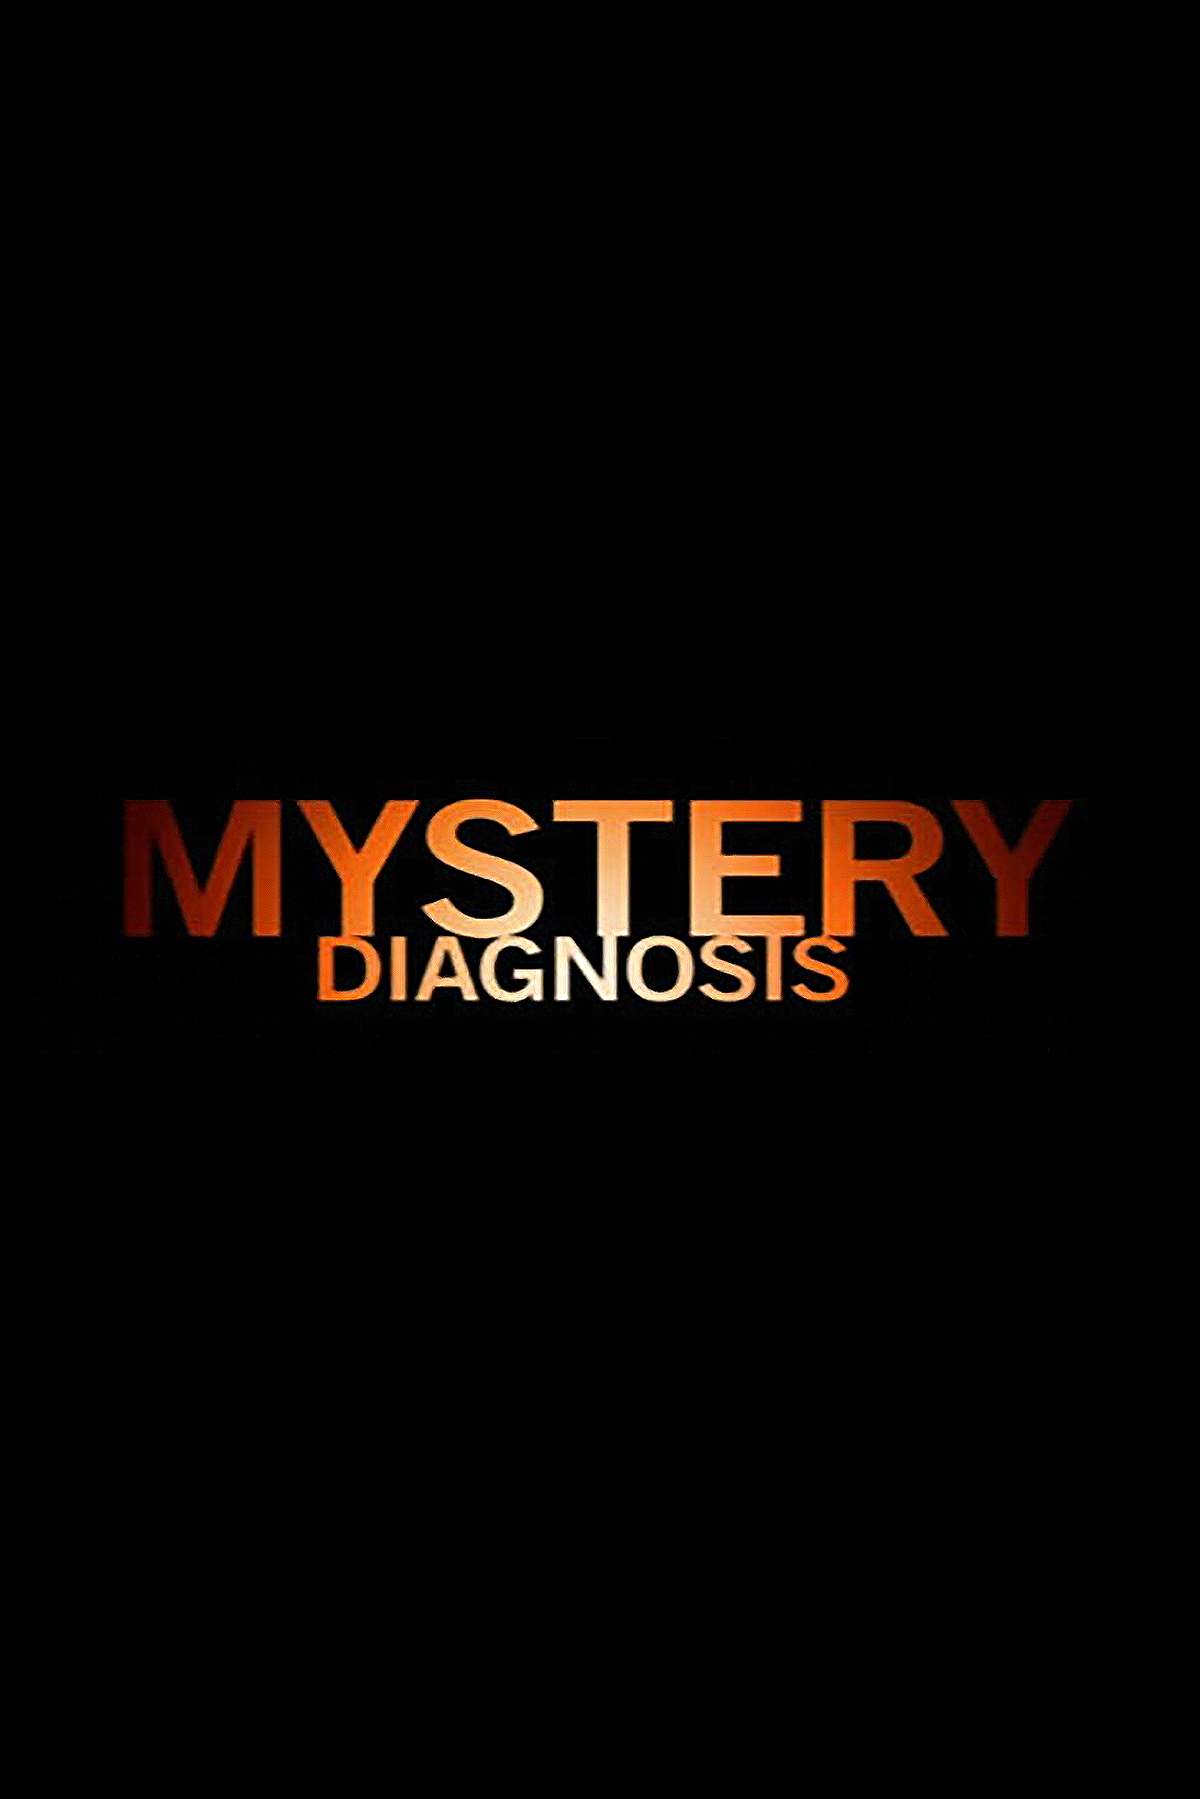 Mystery diagnosis